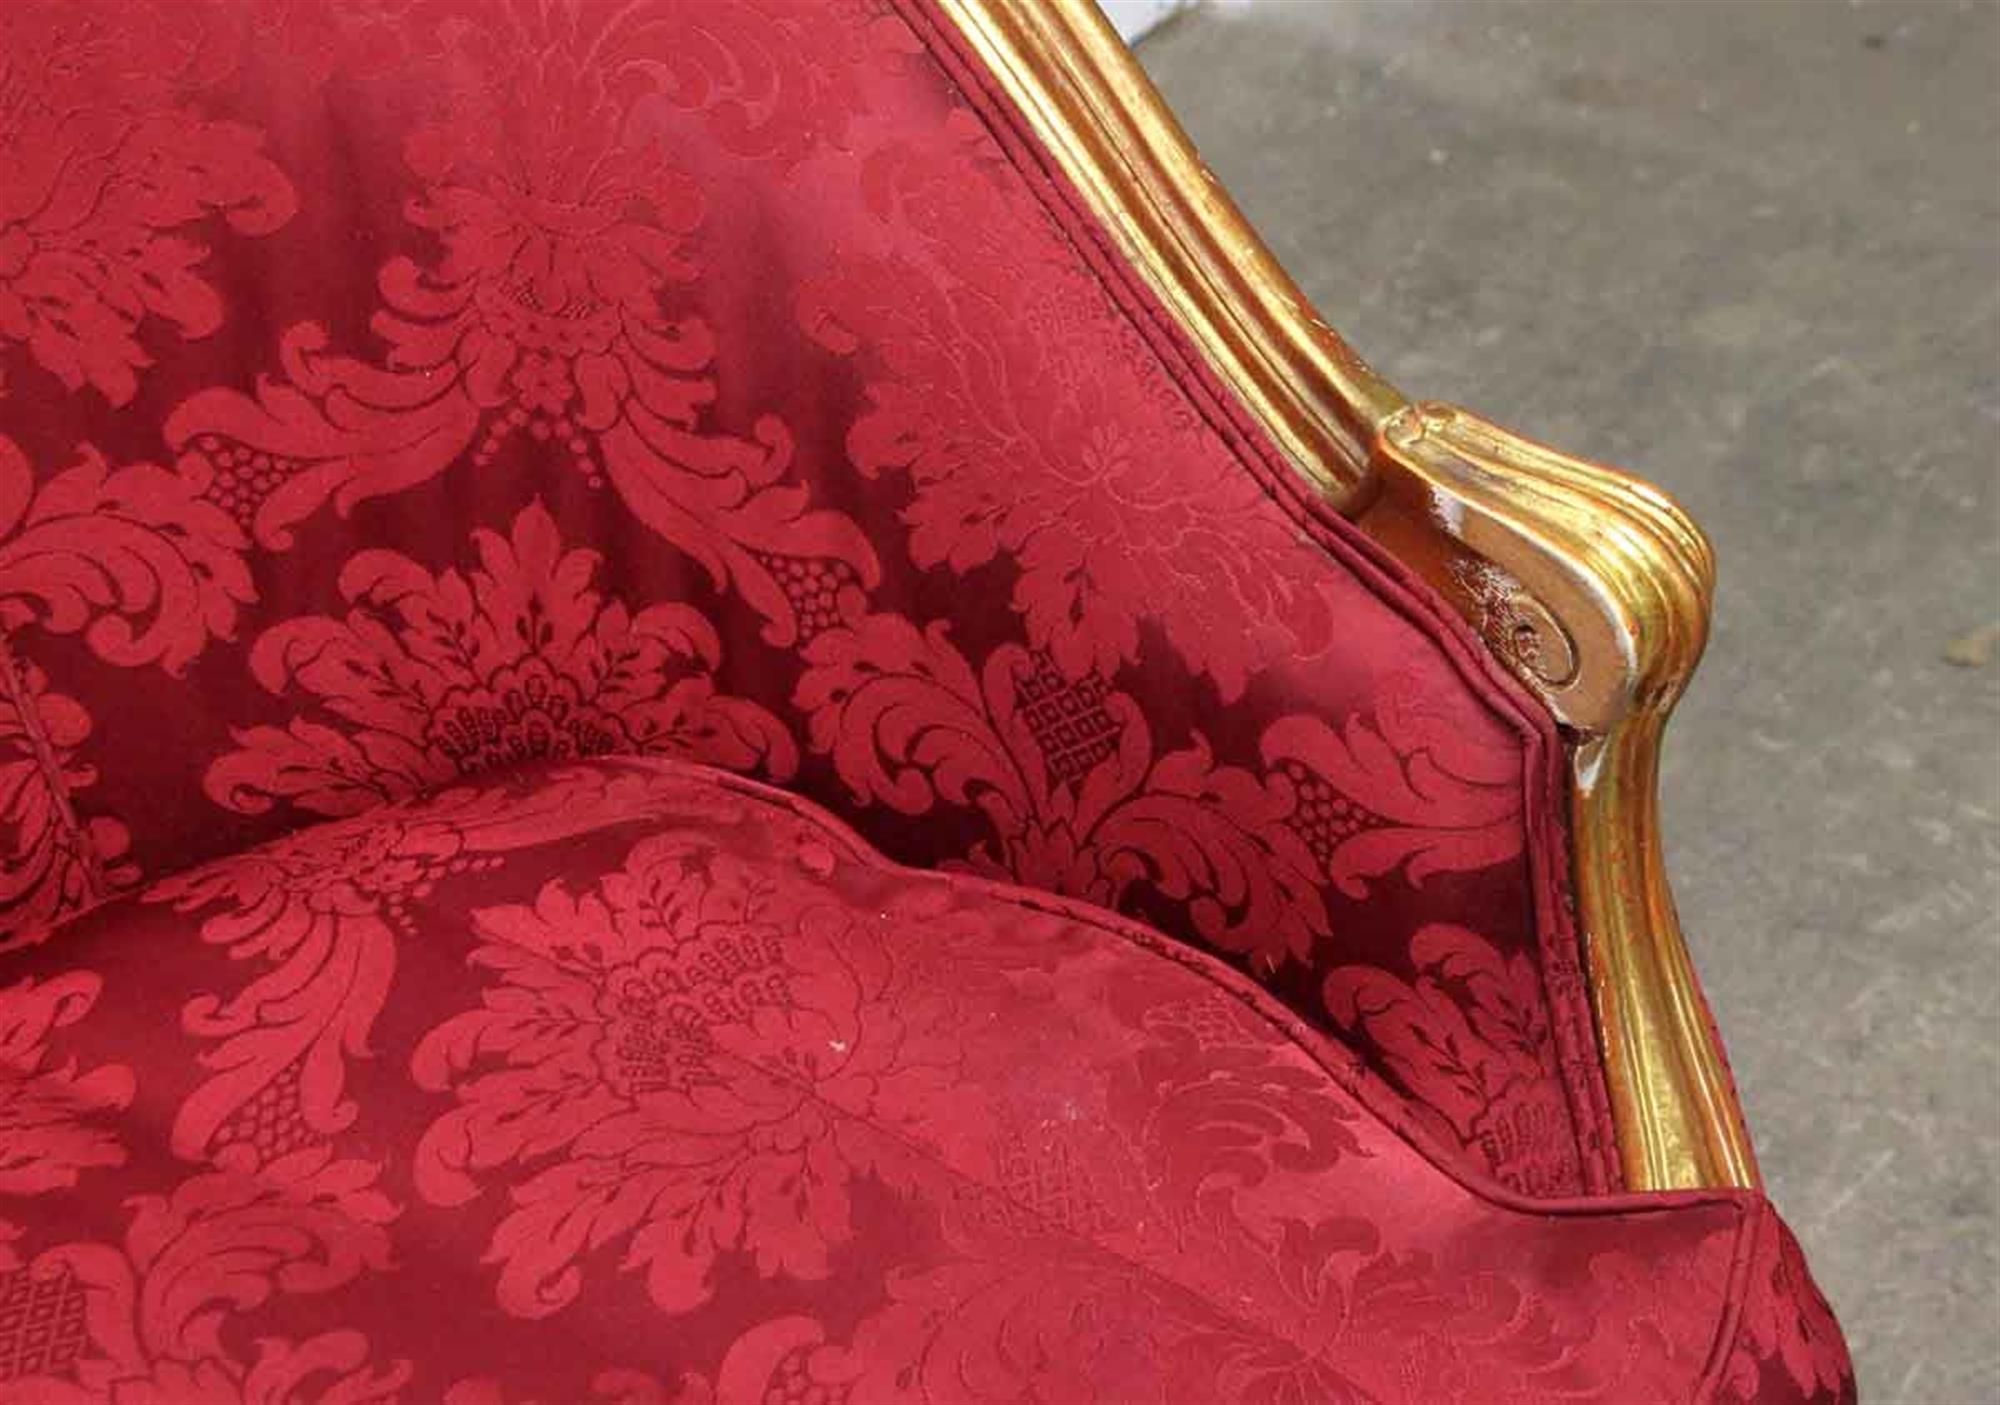 American 1890s Gilded Carved Wood Sofa Couch with Red Floral Upholstery